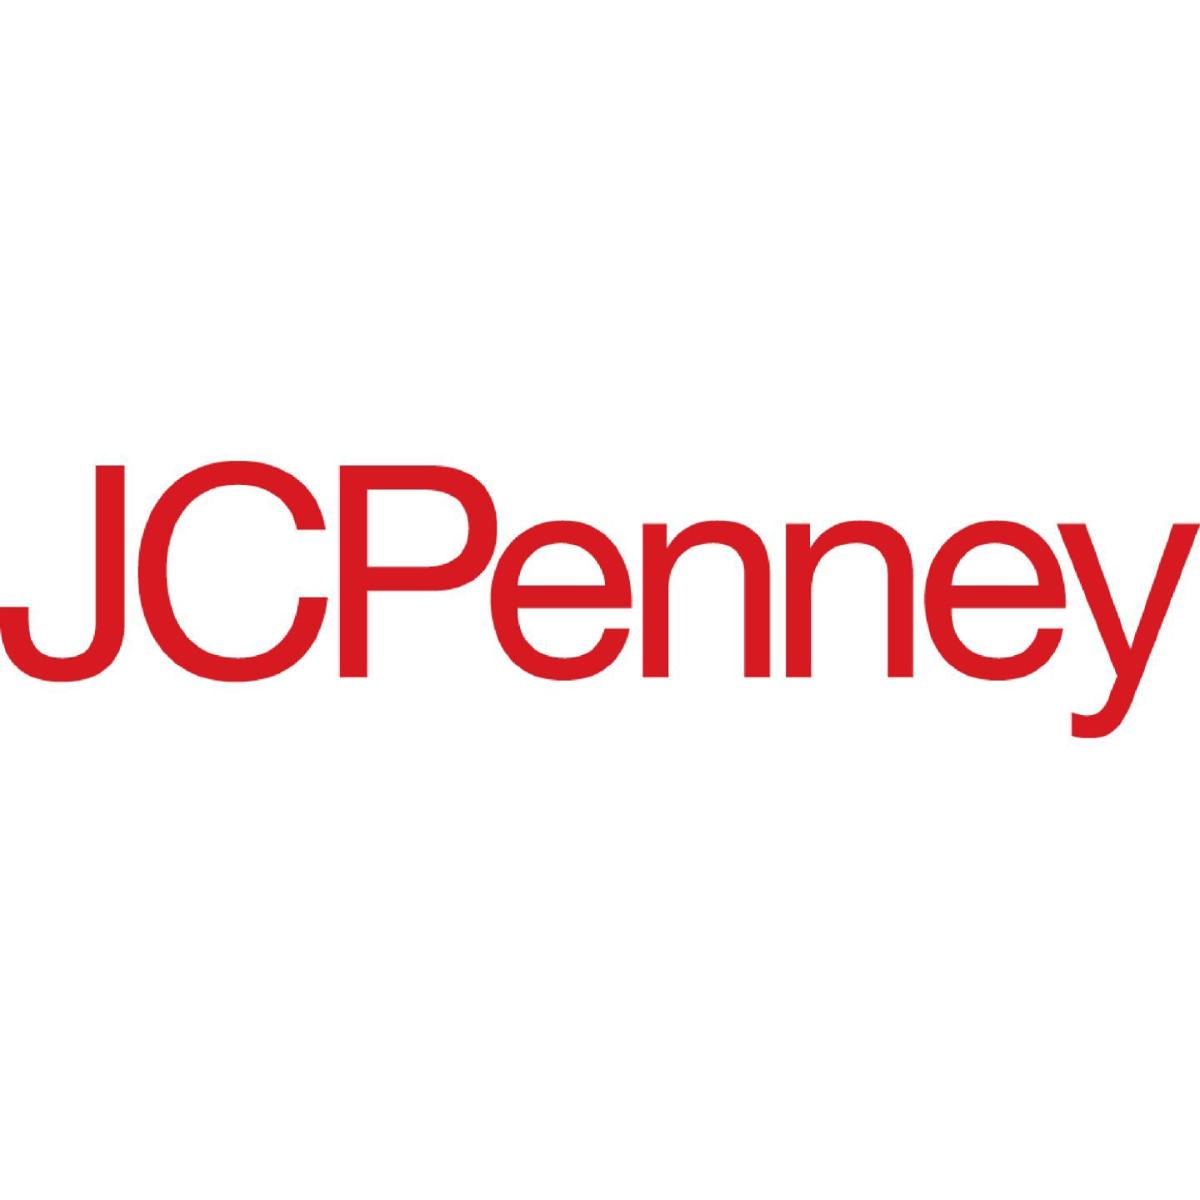 jcpenney-2